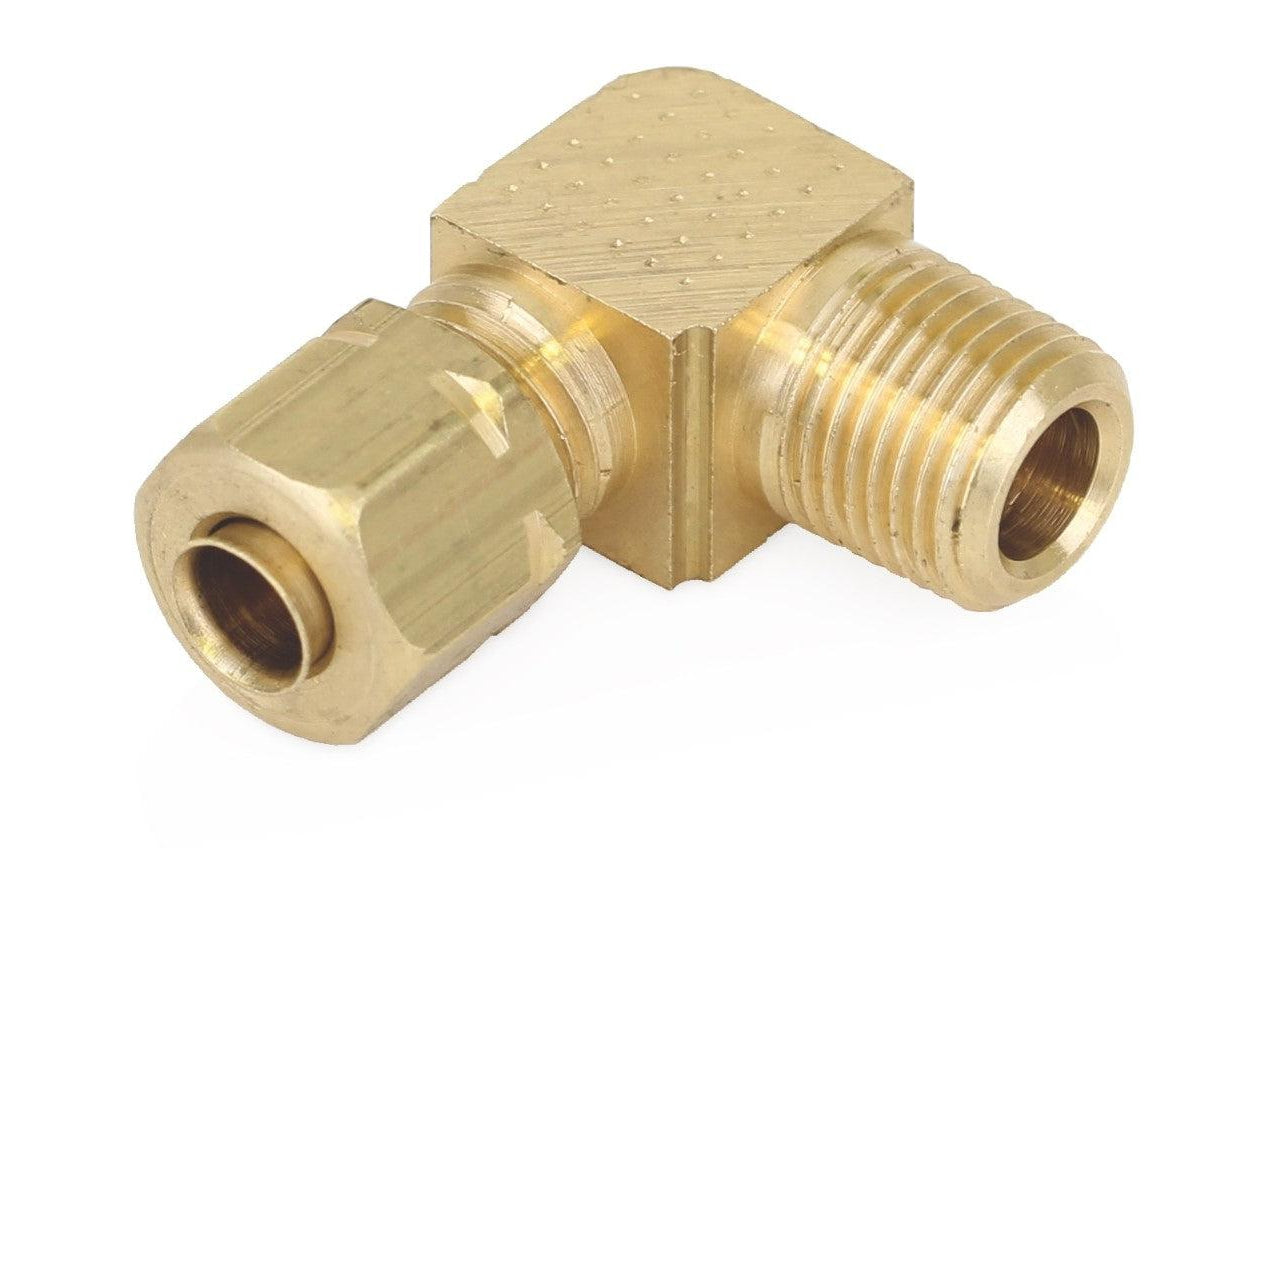 Fitting - Brass Male Tube Elbows 3/16 in. (4.8 mm) Tube x 1/8 in. (3.2 mm) NPTF